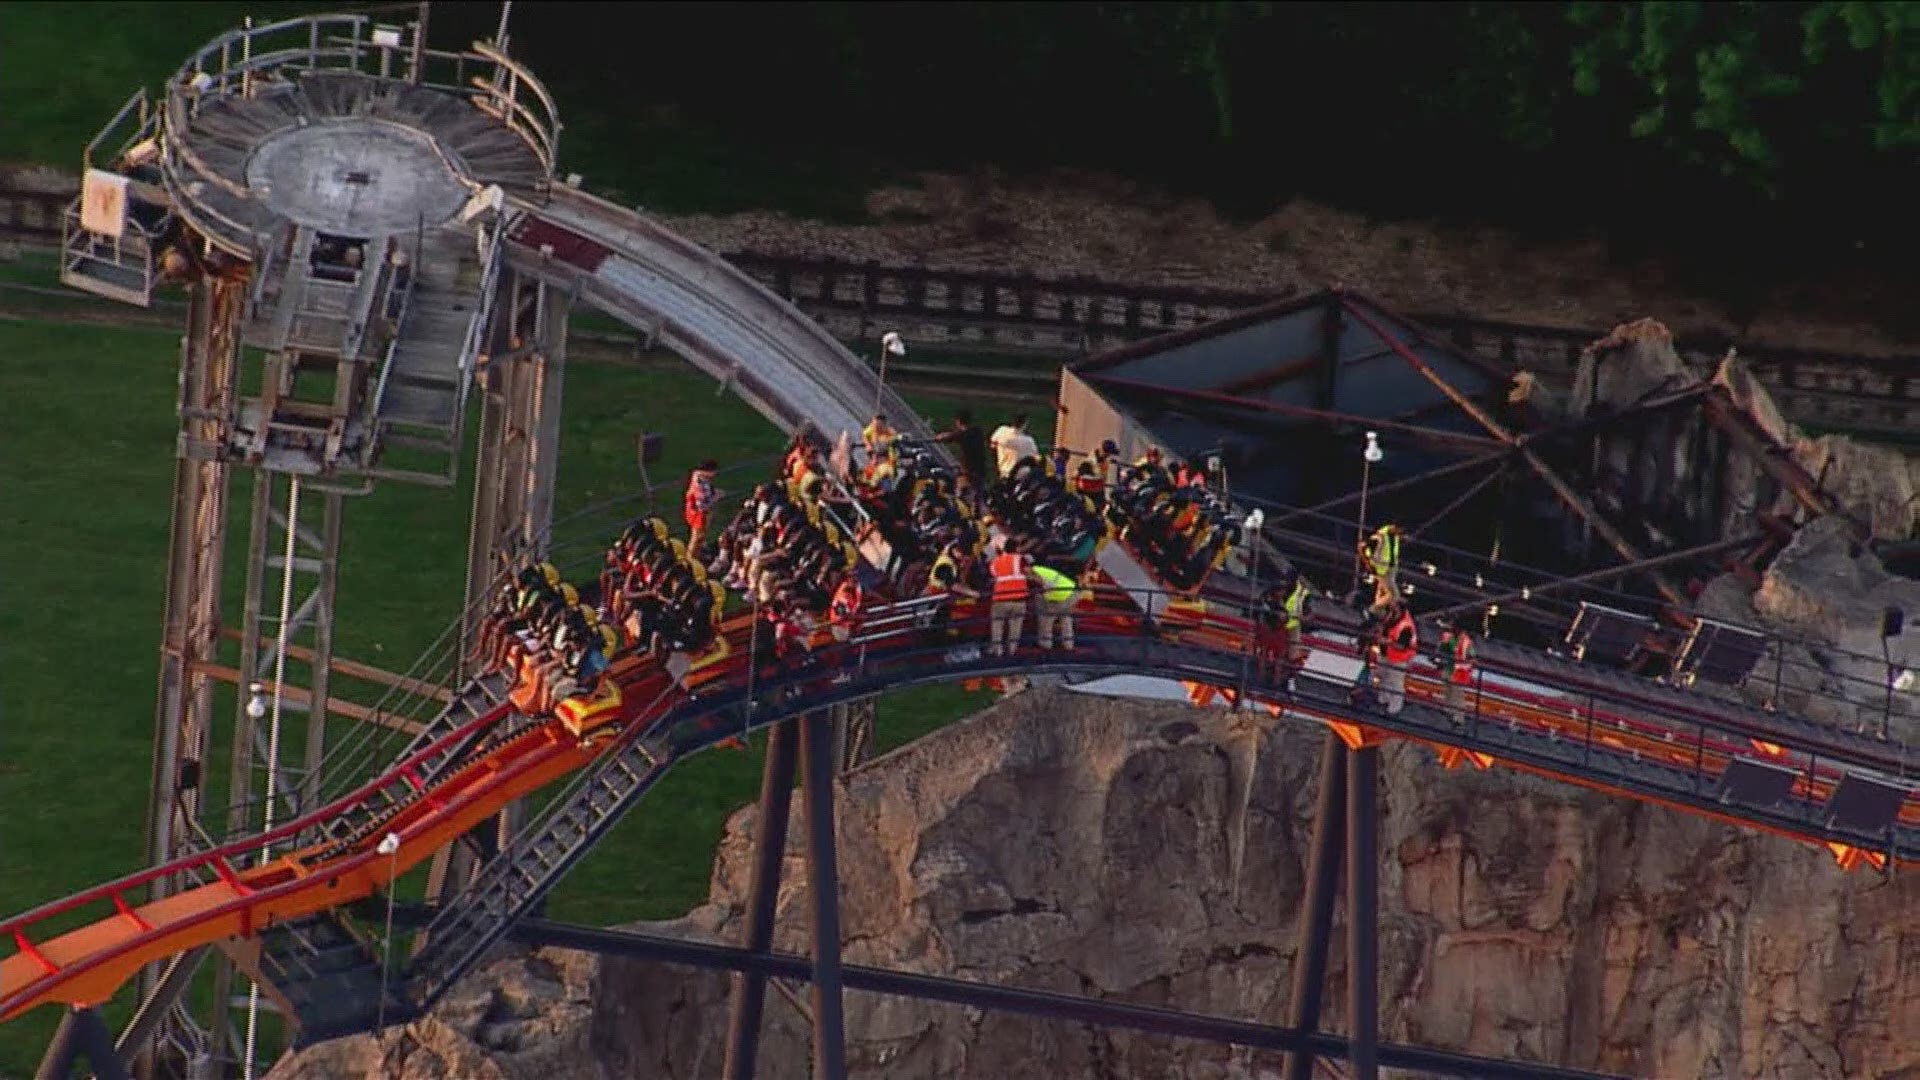 Aerial footage shows workers helping the riders down from the top of the ride.